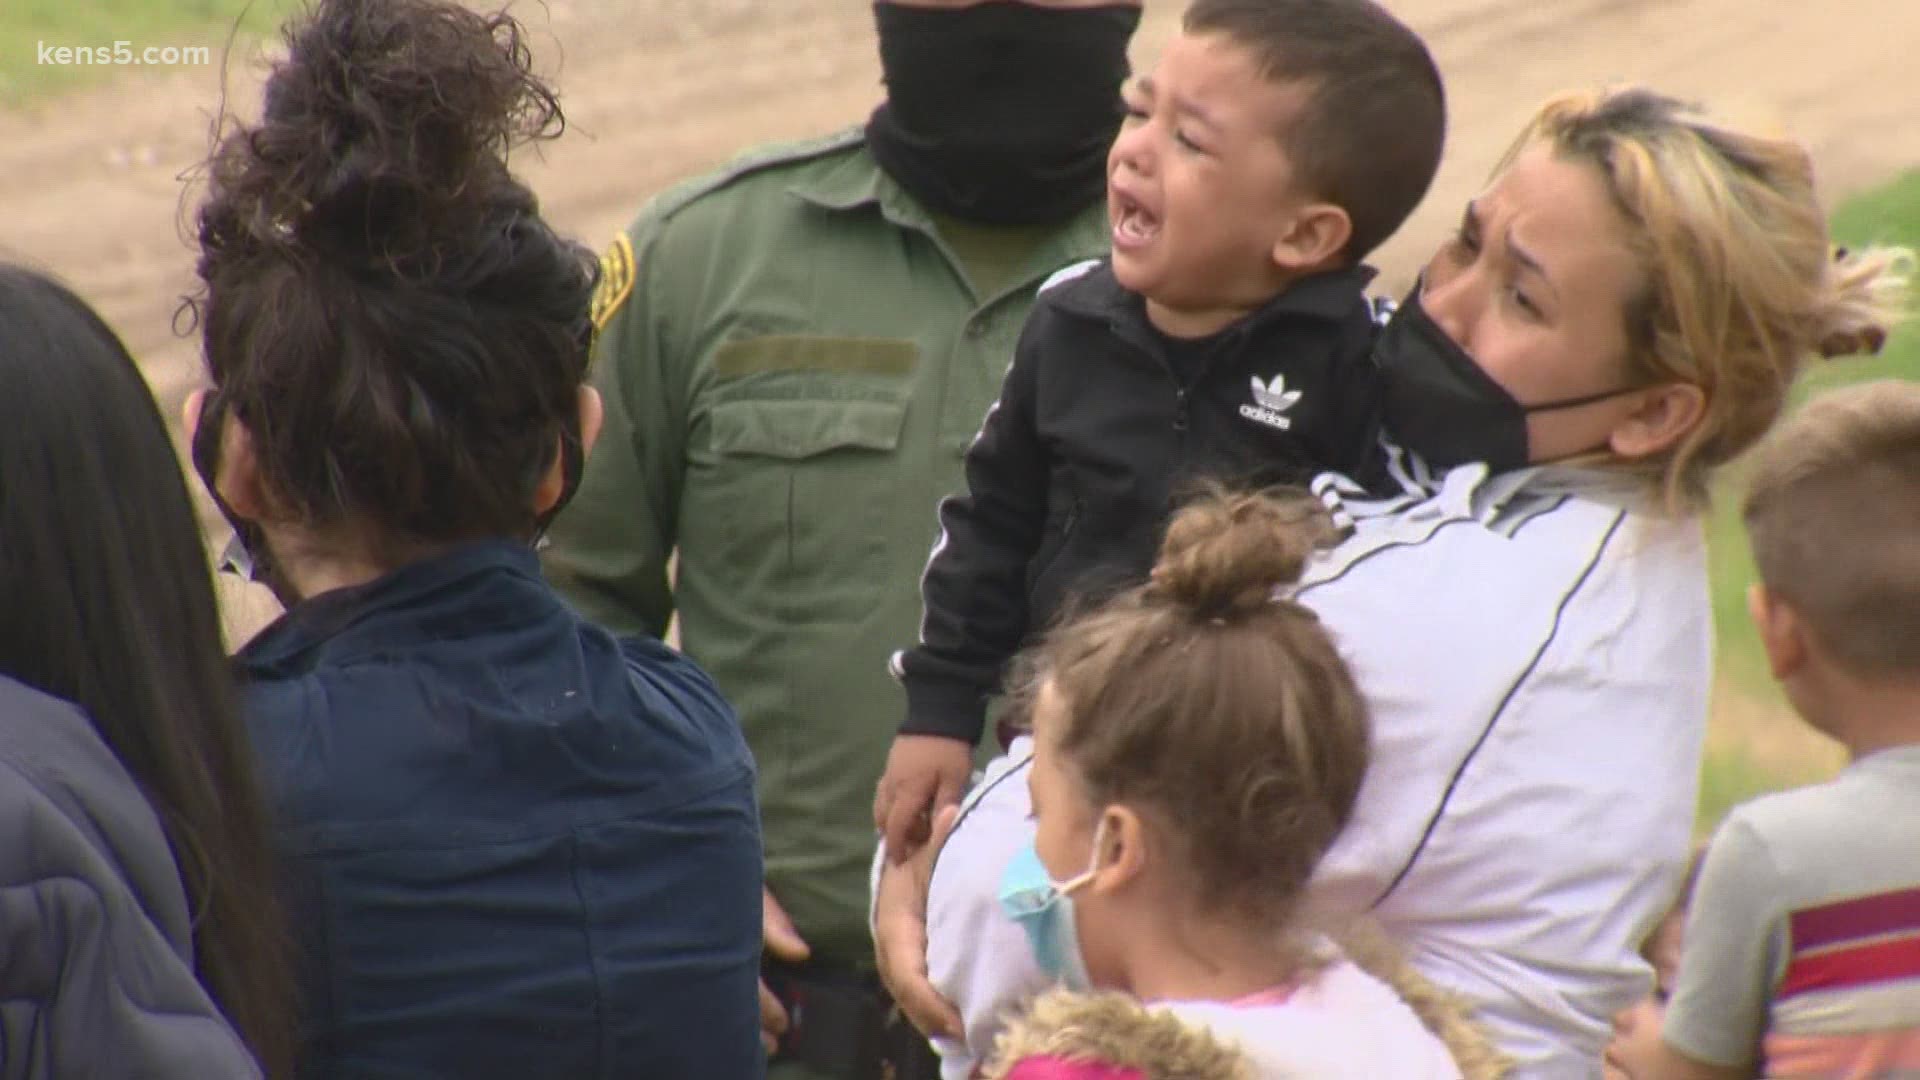 Border Patrol officials say many migrants are seeking out authorities in hopes of asylum, but many others don't want to get caught.